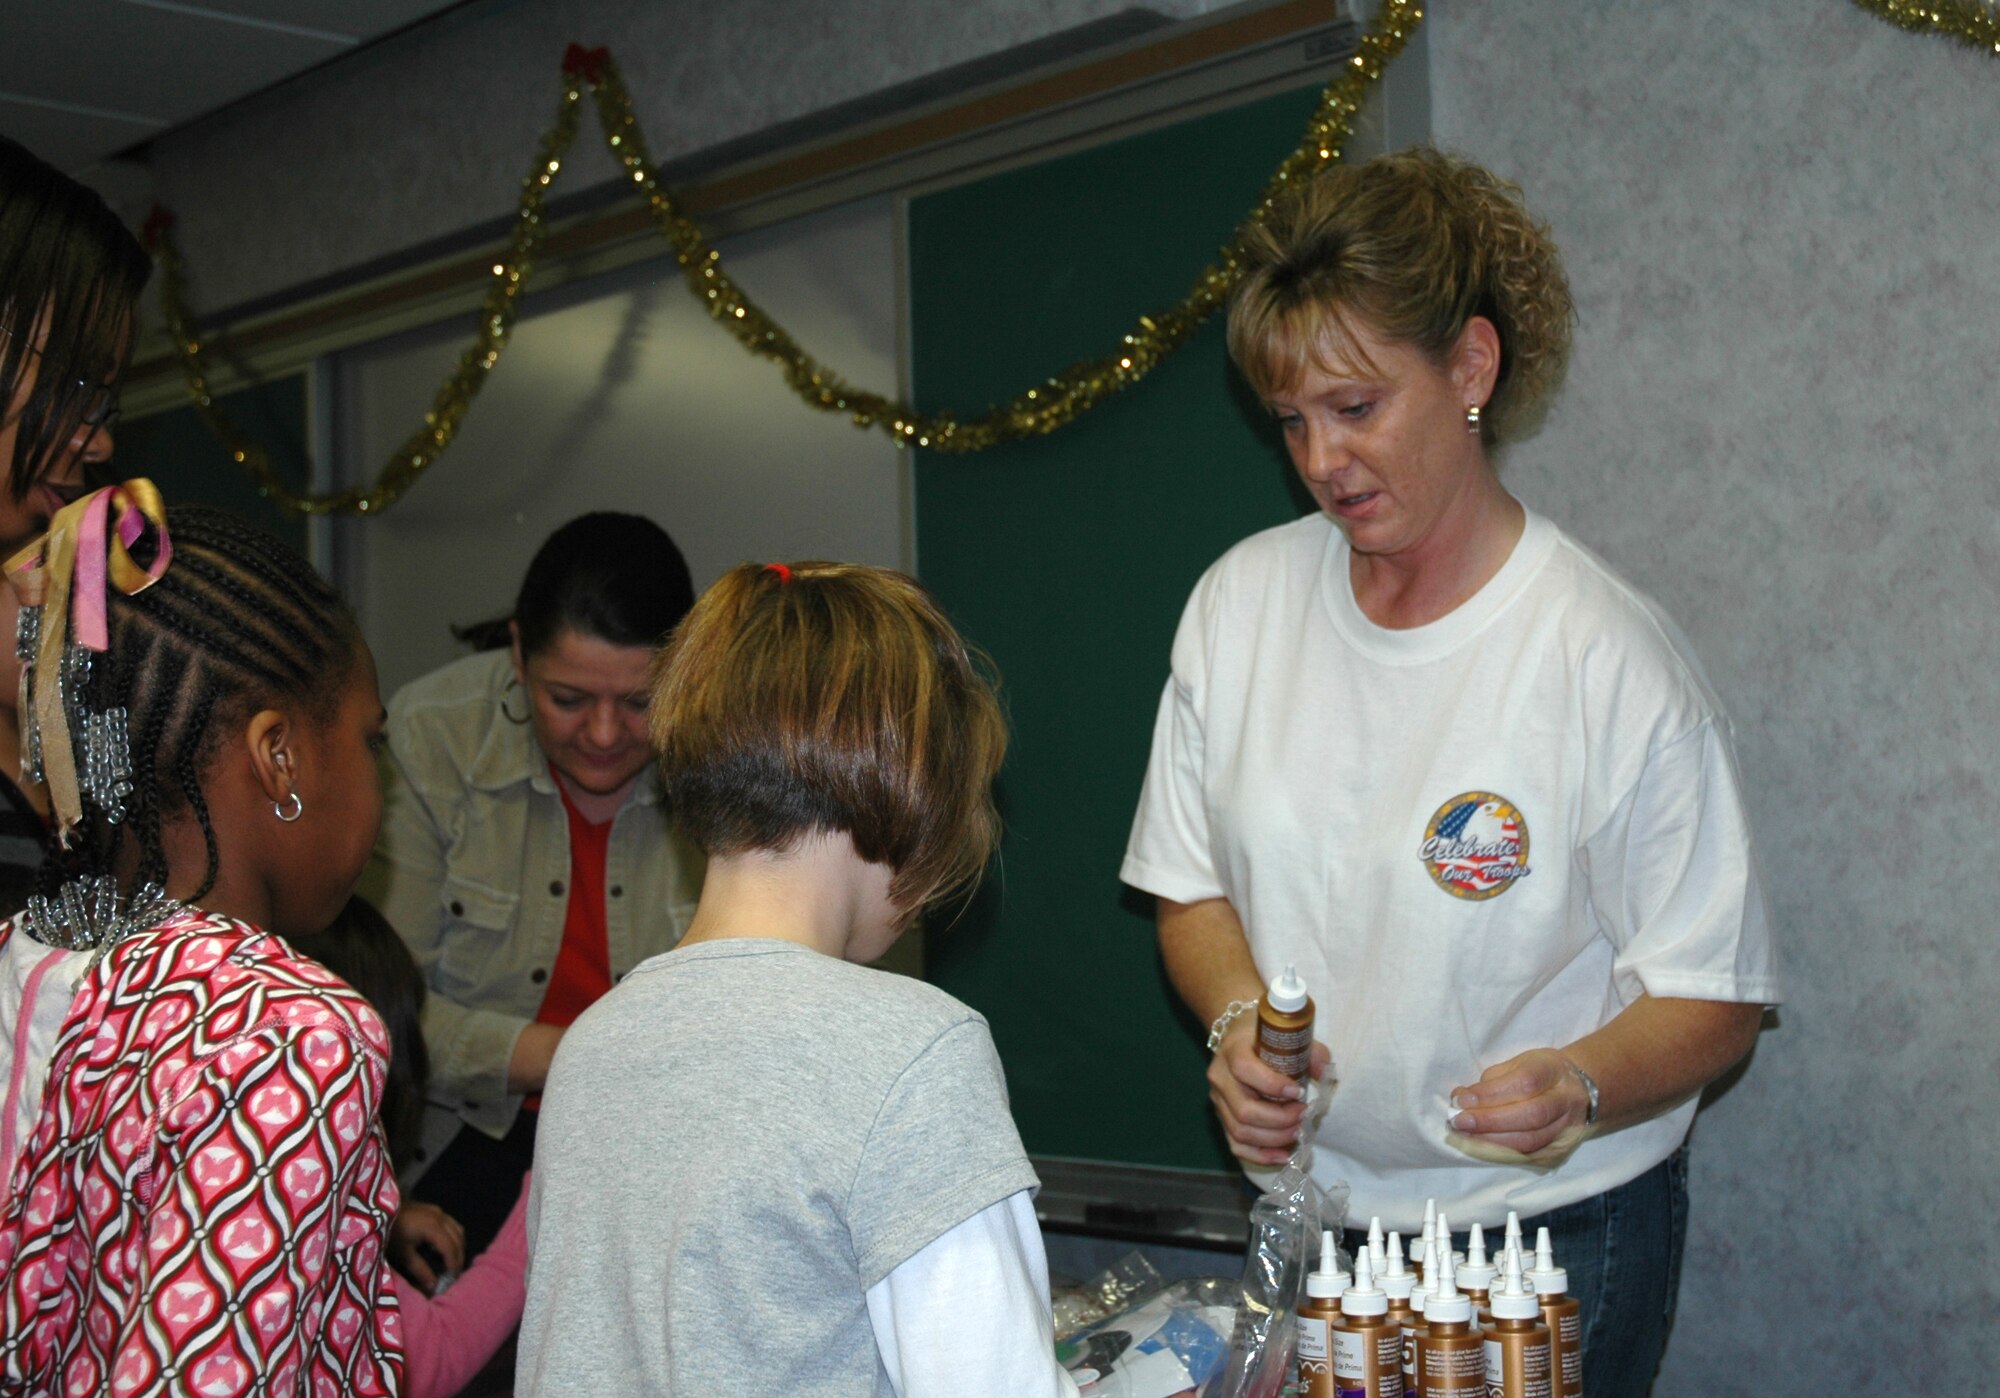 Master Sgt. Kat Mygan, 325th Mission Support Squadron family readiness manager, assists children with holiday crafting at the "Hearts Apart" holiday party here Dec. 13.  Sergeant Mygan cooridinated the party for  the more than 45 people in attendance.  (U.S. Air Force photo/Staff Sgt. Timothy R. Capling)